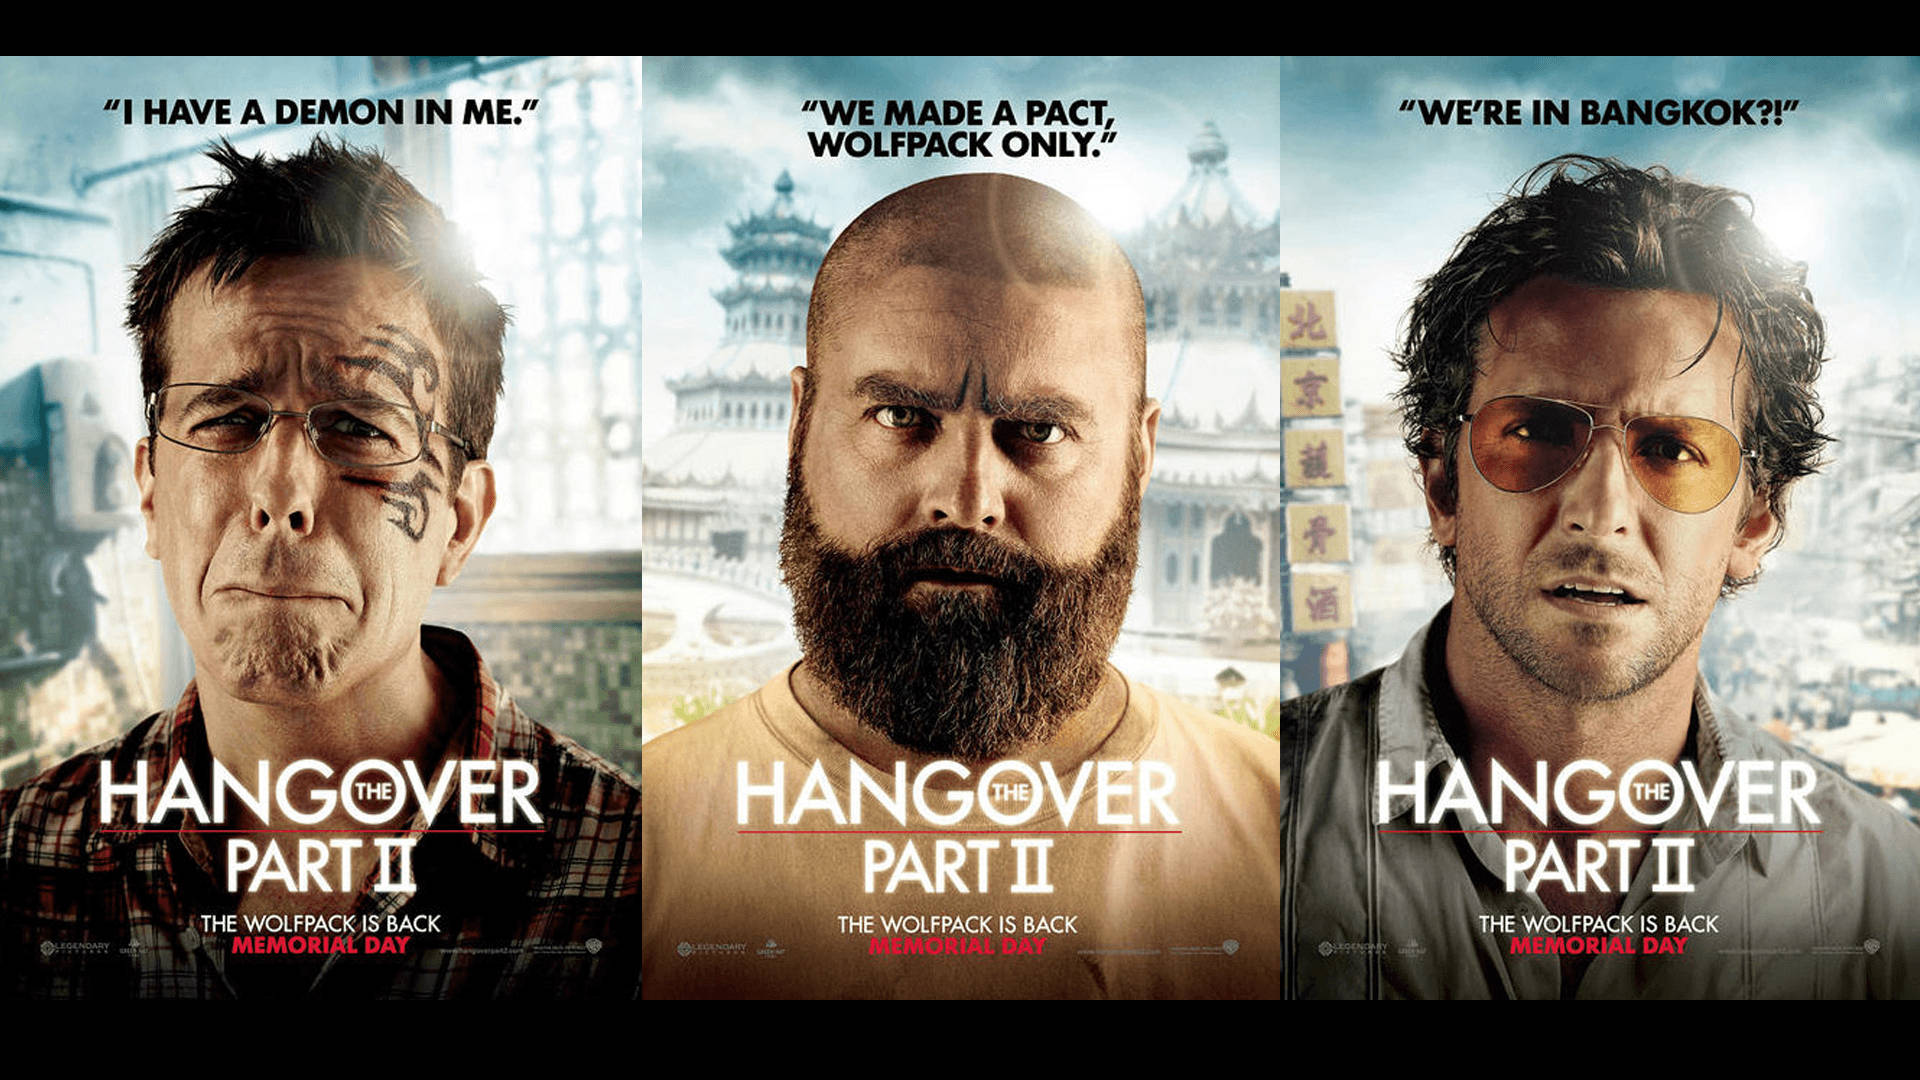 The Hangover Part Ii Movie Posters Trio Collection Background